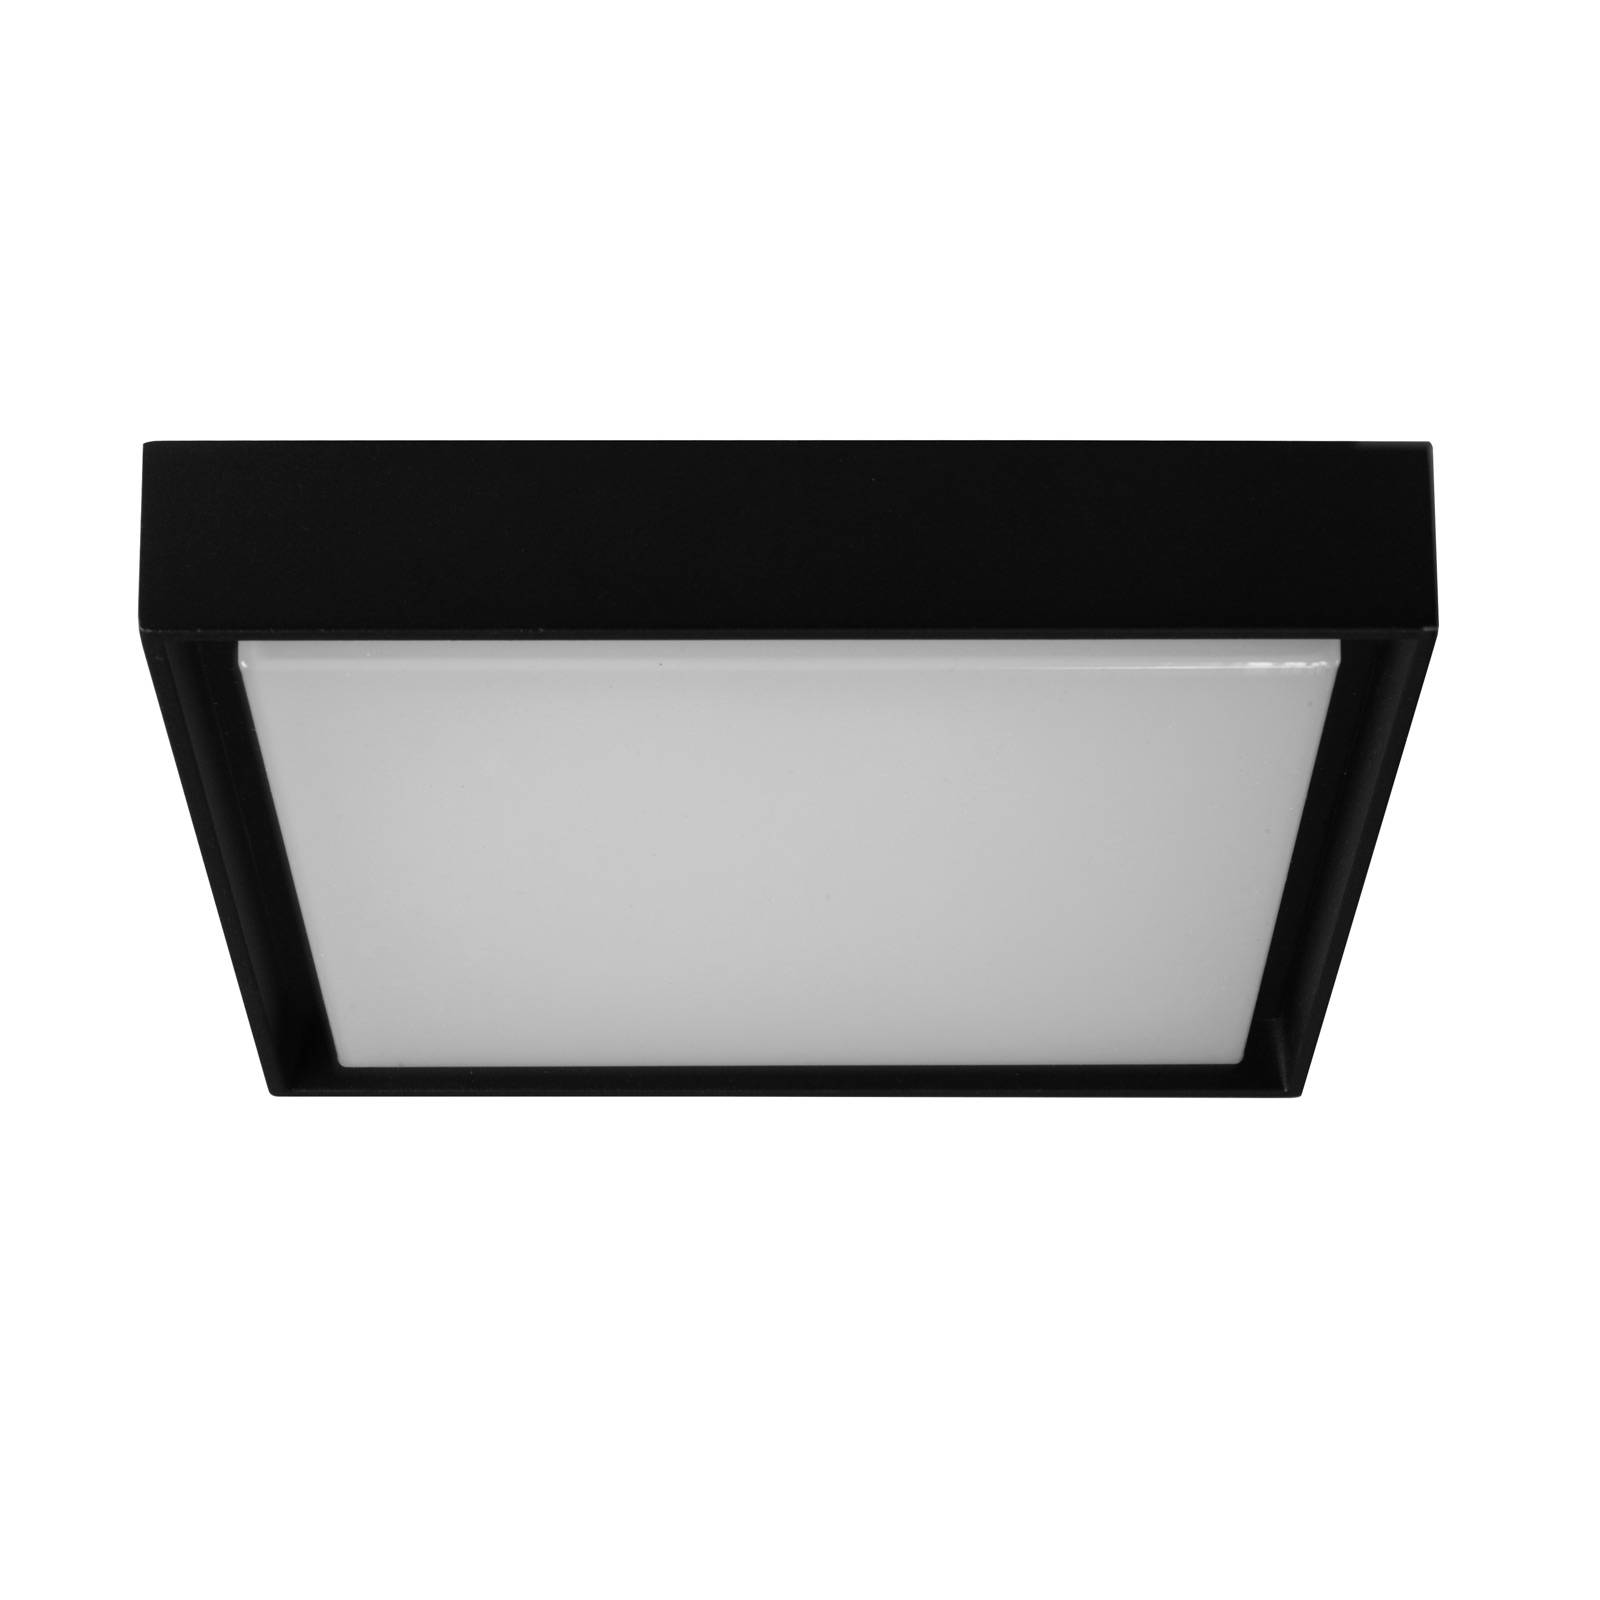 Image of BRUMBERG 60108 plafonnier LED, carré 4251433914822